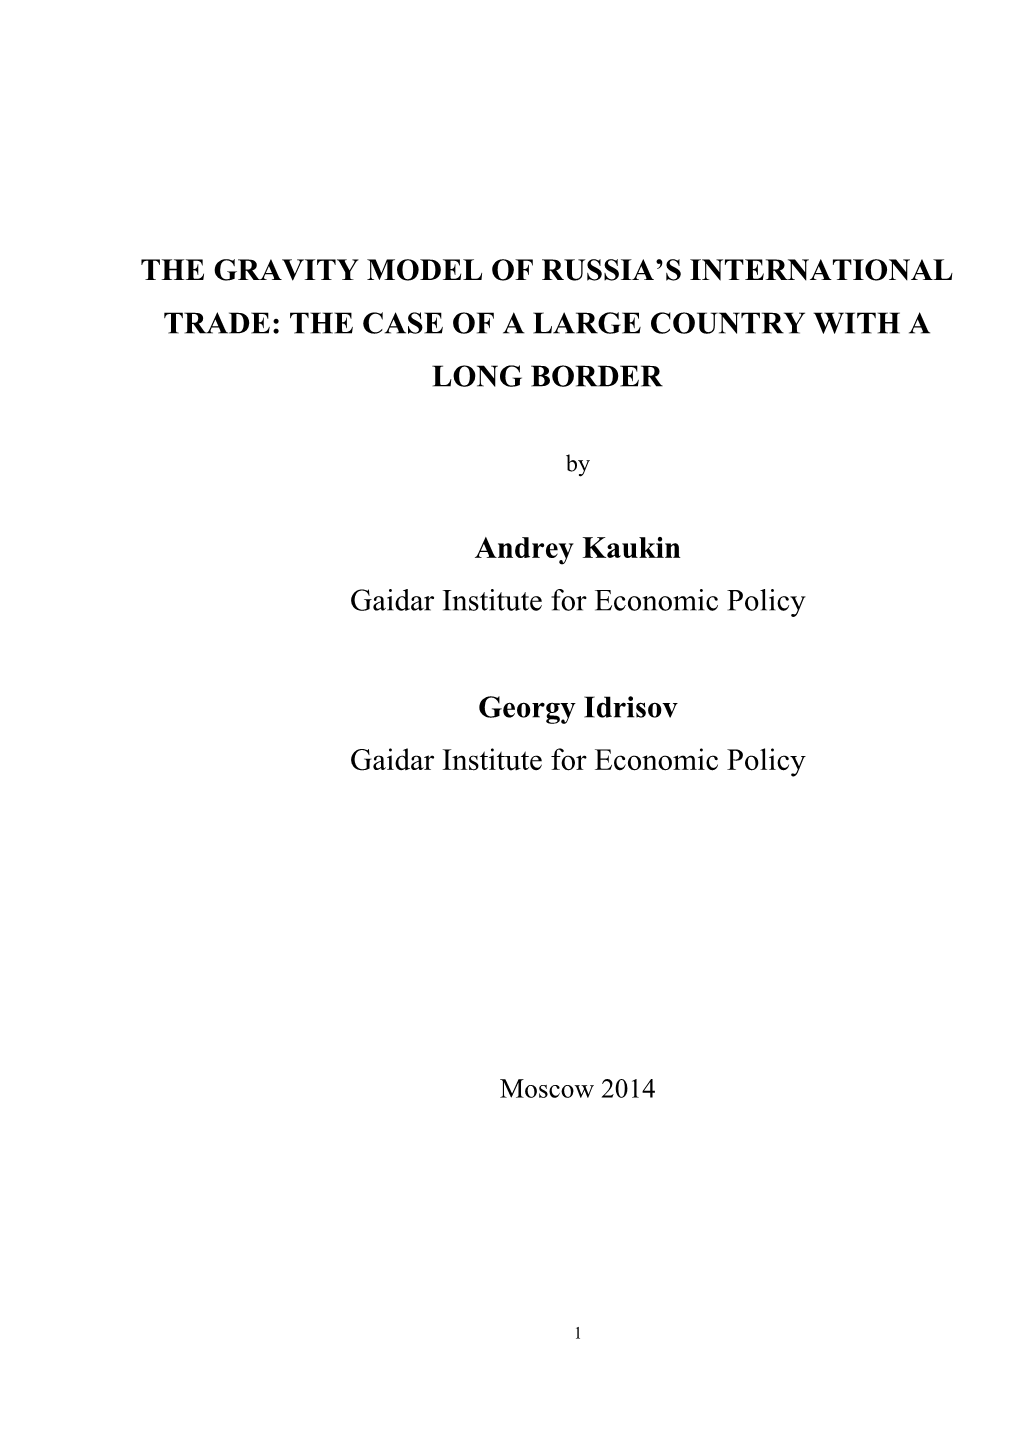 The Gravity Model of Russia's International Trade